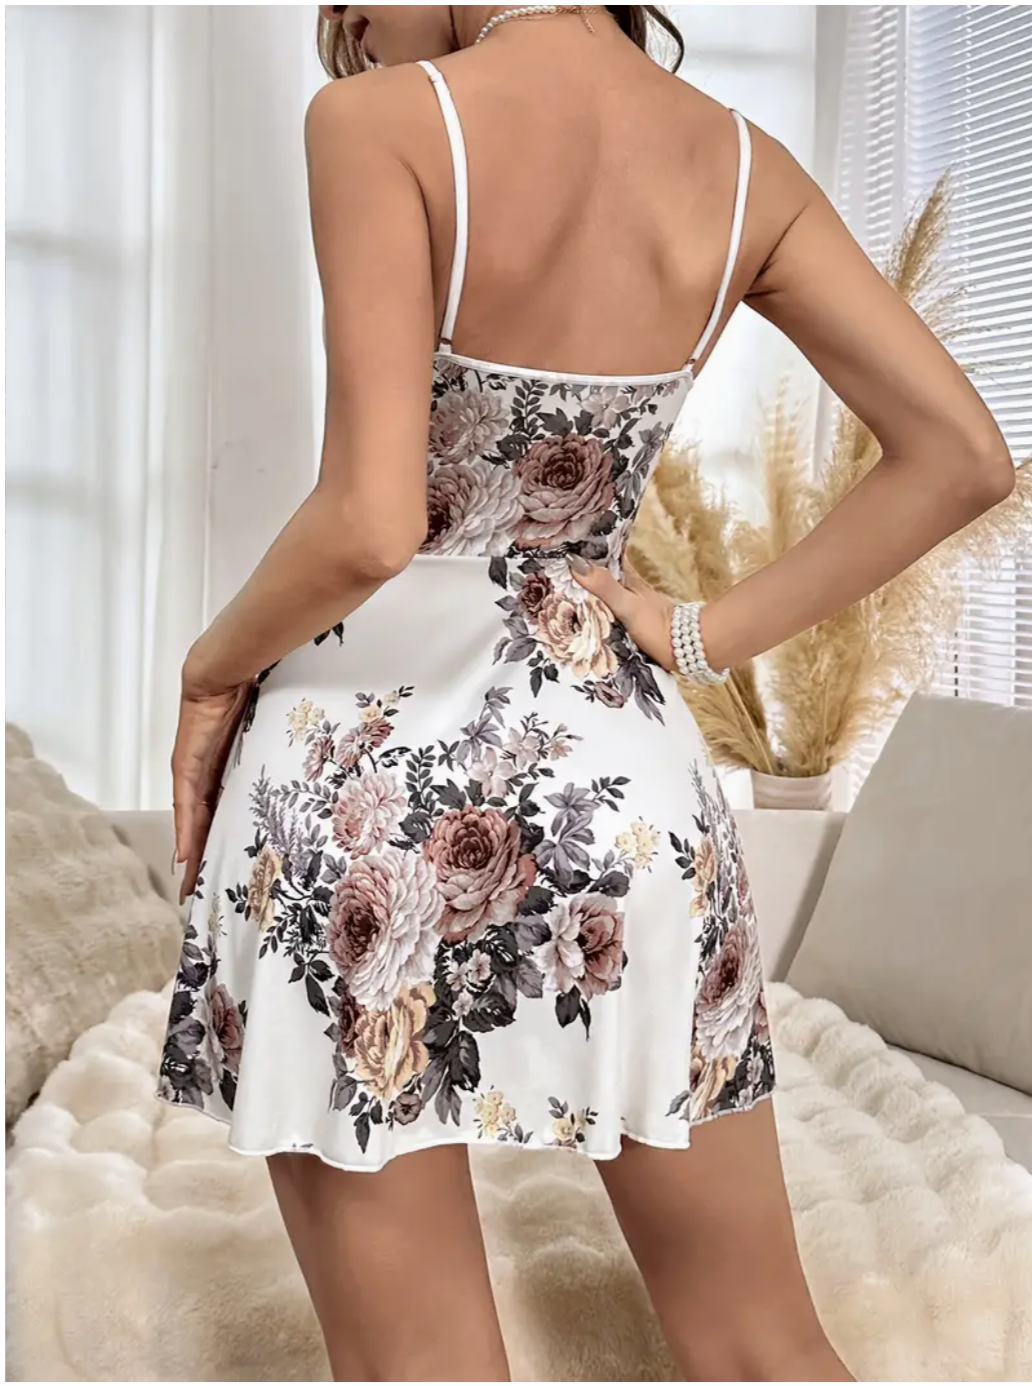 Floral Dreams: Lace Trim Nightdress and Cutout Slip Pajama Dress – Perfect Fusion of Comfort and Elegance for Women's Sleepwear!